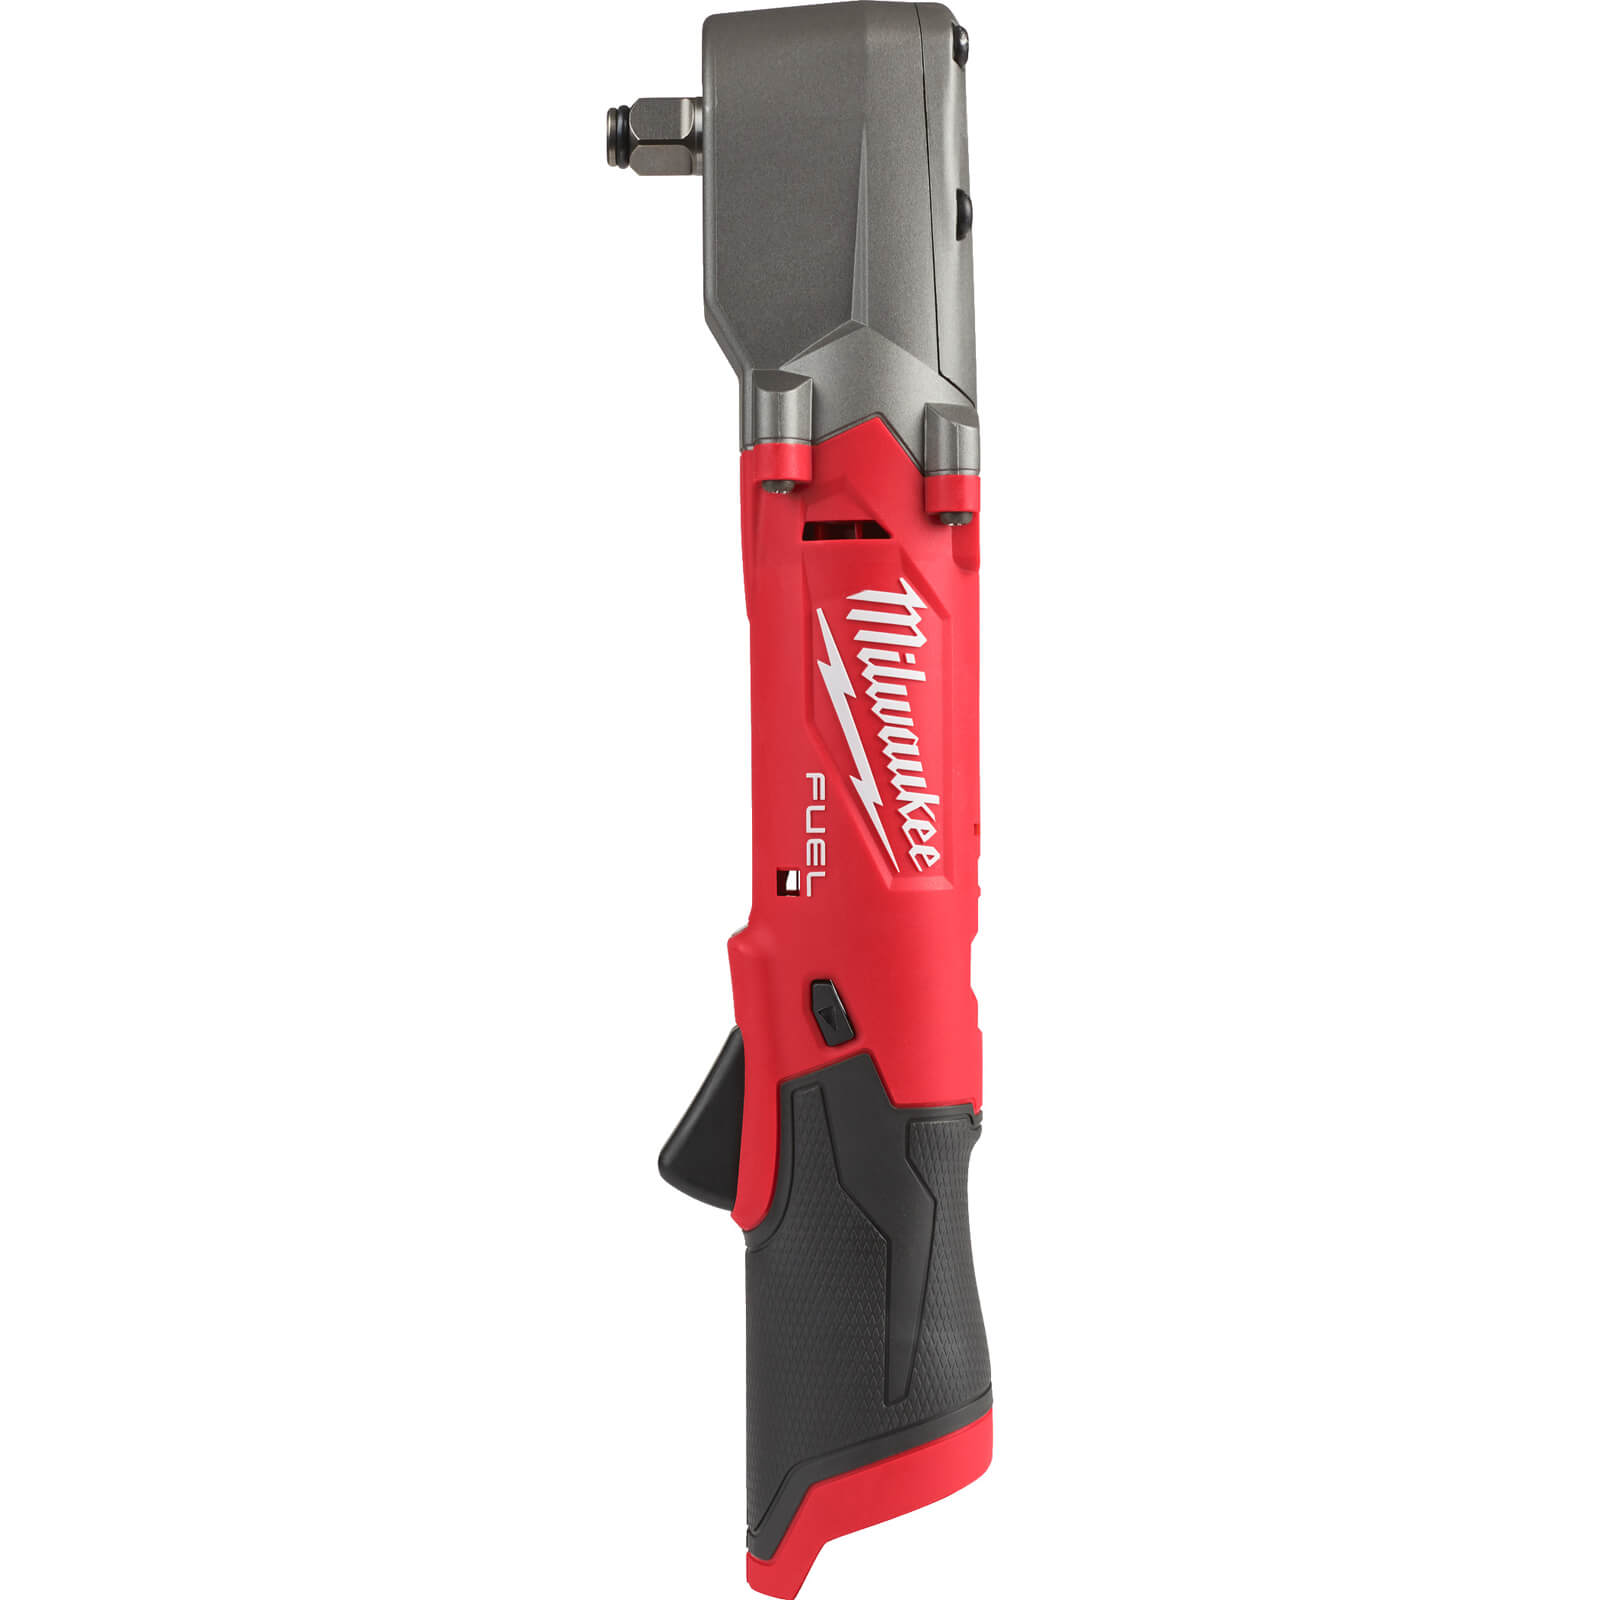 Image of Milwaukee M12 FRAIWF12 Fuel 12v Cordless Brushless 1/2" Drive Ratchet Wrench No Batteries No Charger No Case